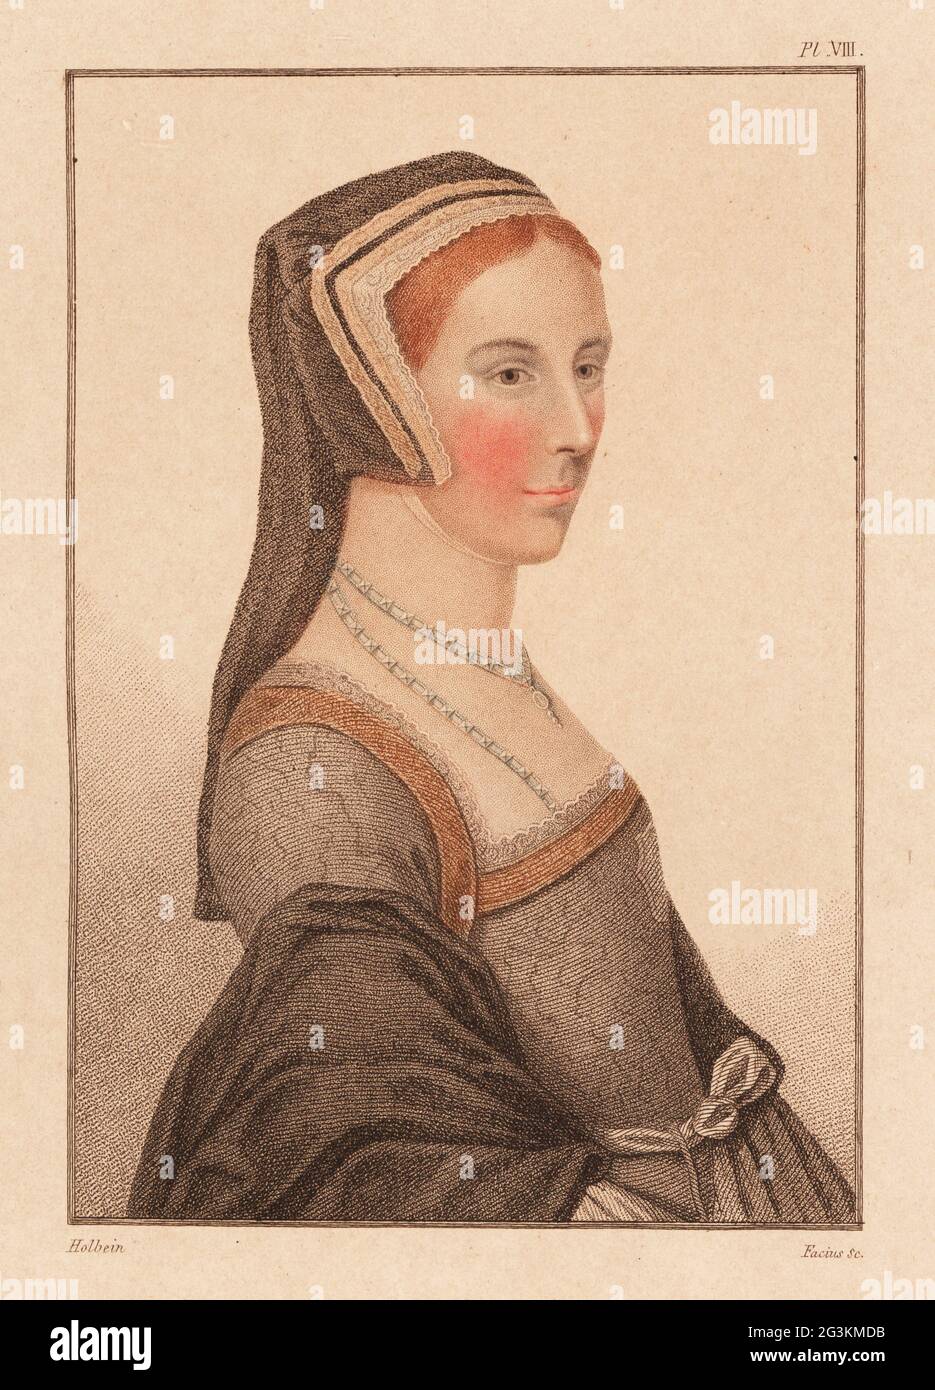 Anne Cresacre, aged 15, ward of Sir Thomas More, later wife of his son John More. Handcoloured copperplate stipple engraving by  George Sigmund Facius after a portrait by Hans Holbein the Younger from Imitations of Original Drawings by Hans Holbein, John Chamberlaine, London, 1812. Stock Photo